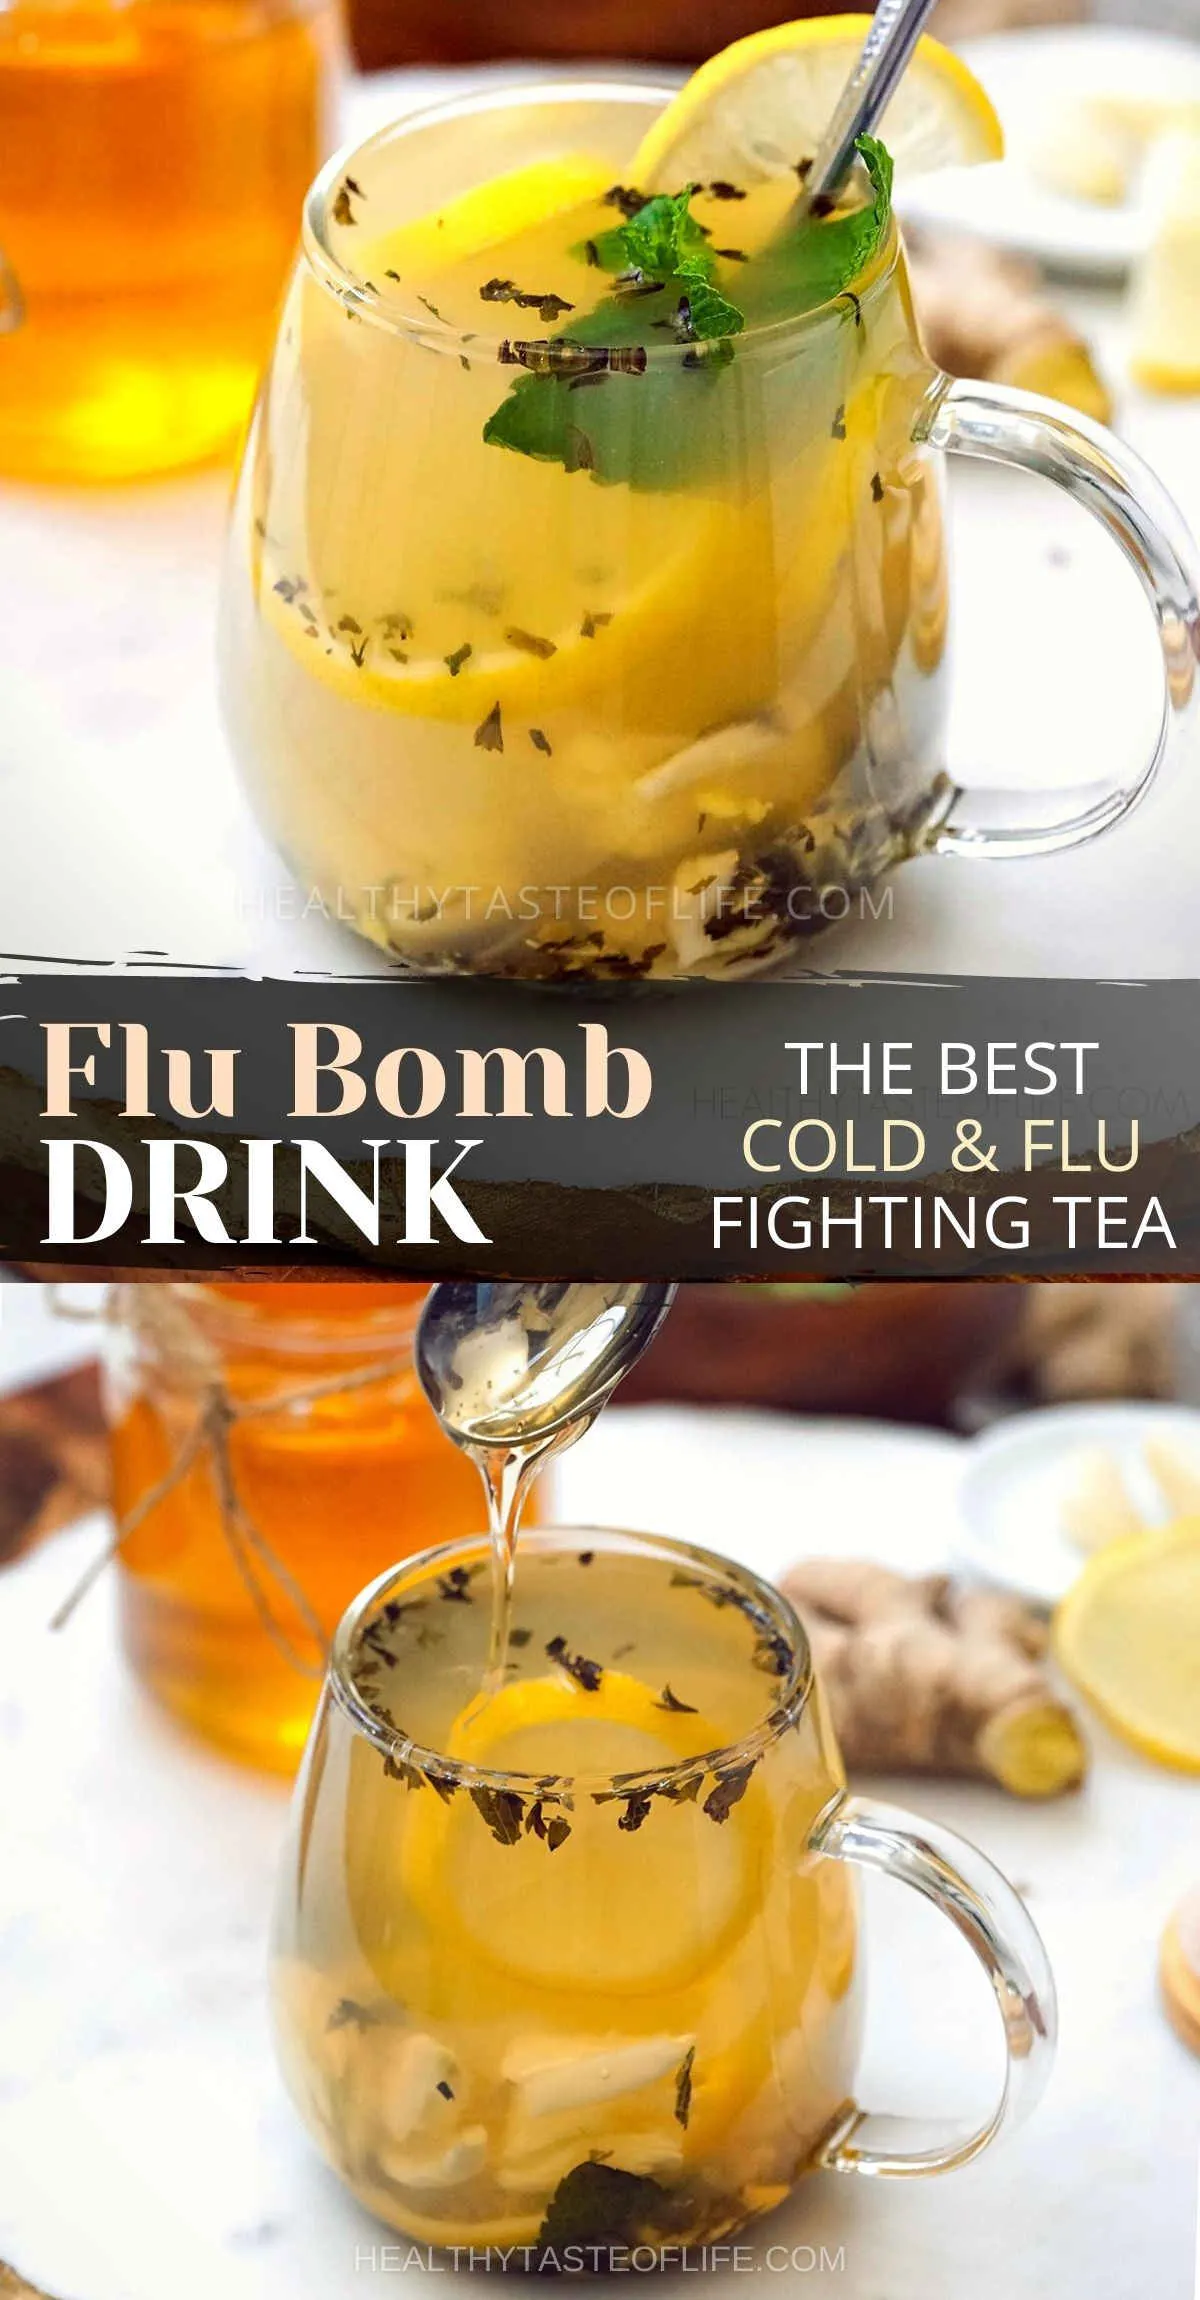 Flu bomb - a lemon honey ginger garlic immune booster drink that makes a healthful cold & flu natural remedy that helps boost the immune system during the flu season. Sip this flu bomb tea to prevent catching the flu or as a complementary aid for a sore throat. The best tea you can make for cold and flu for you and your kids! #flubomb #teaforcold #teaforflu #lemon #ginger #garlic #honey #flutea #coldtea #bestteaforflu #coldandflutea #naturalremedy #immunesystem #immuneboosterdrink